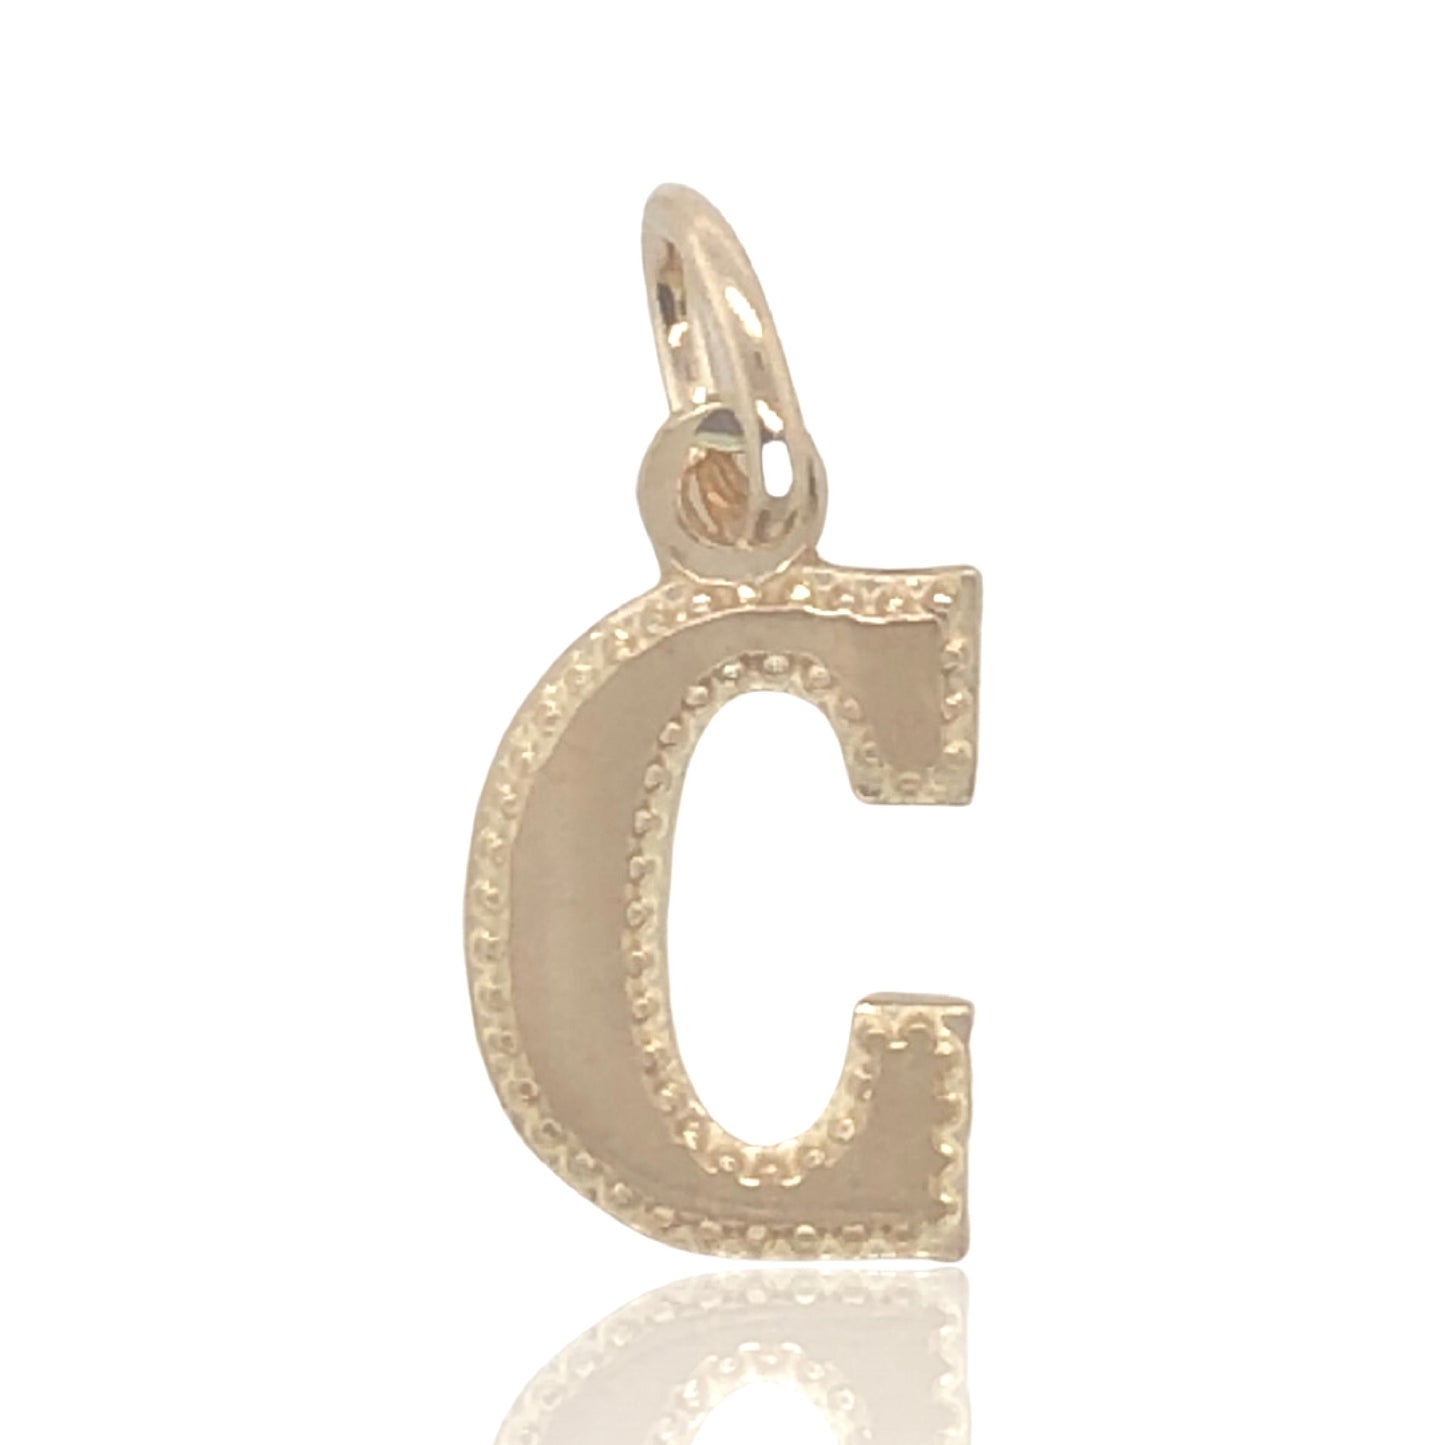 10K Yellow Gold Initial Charm Letter "C"